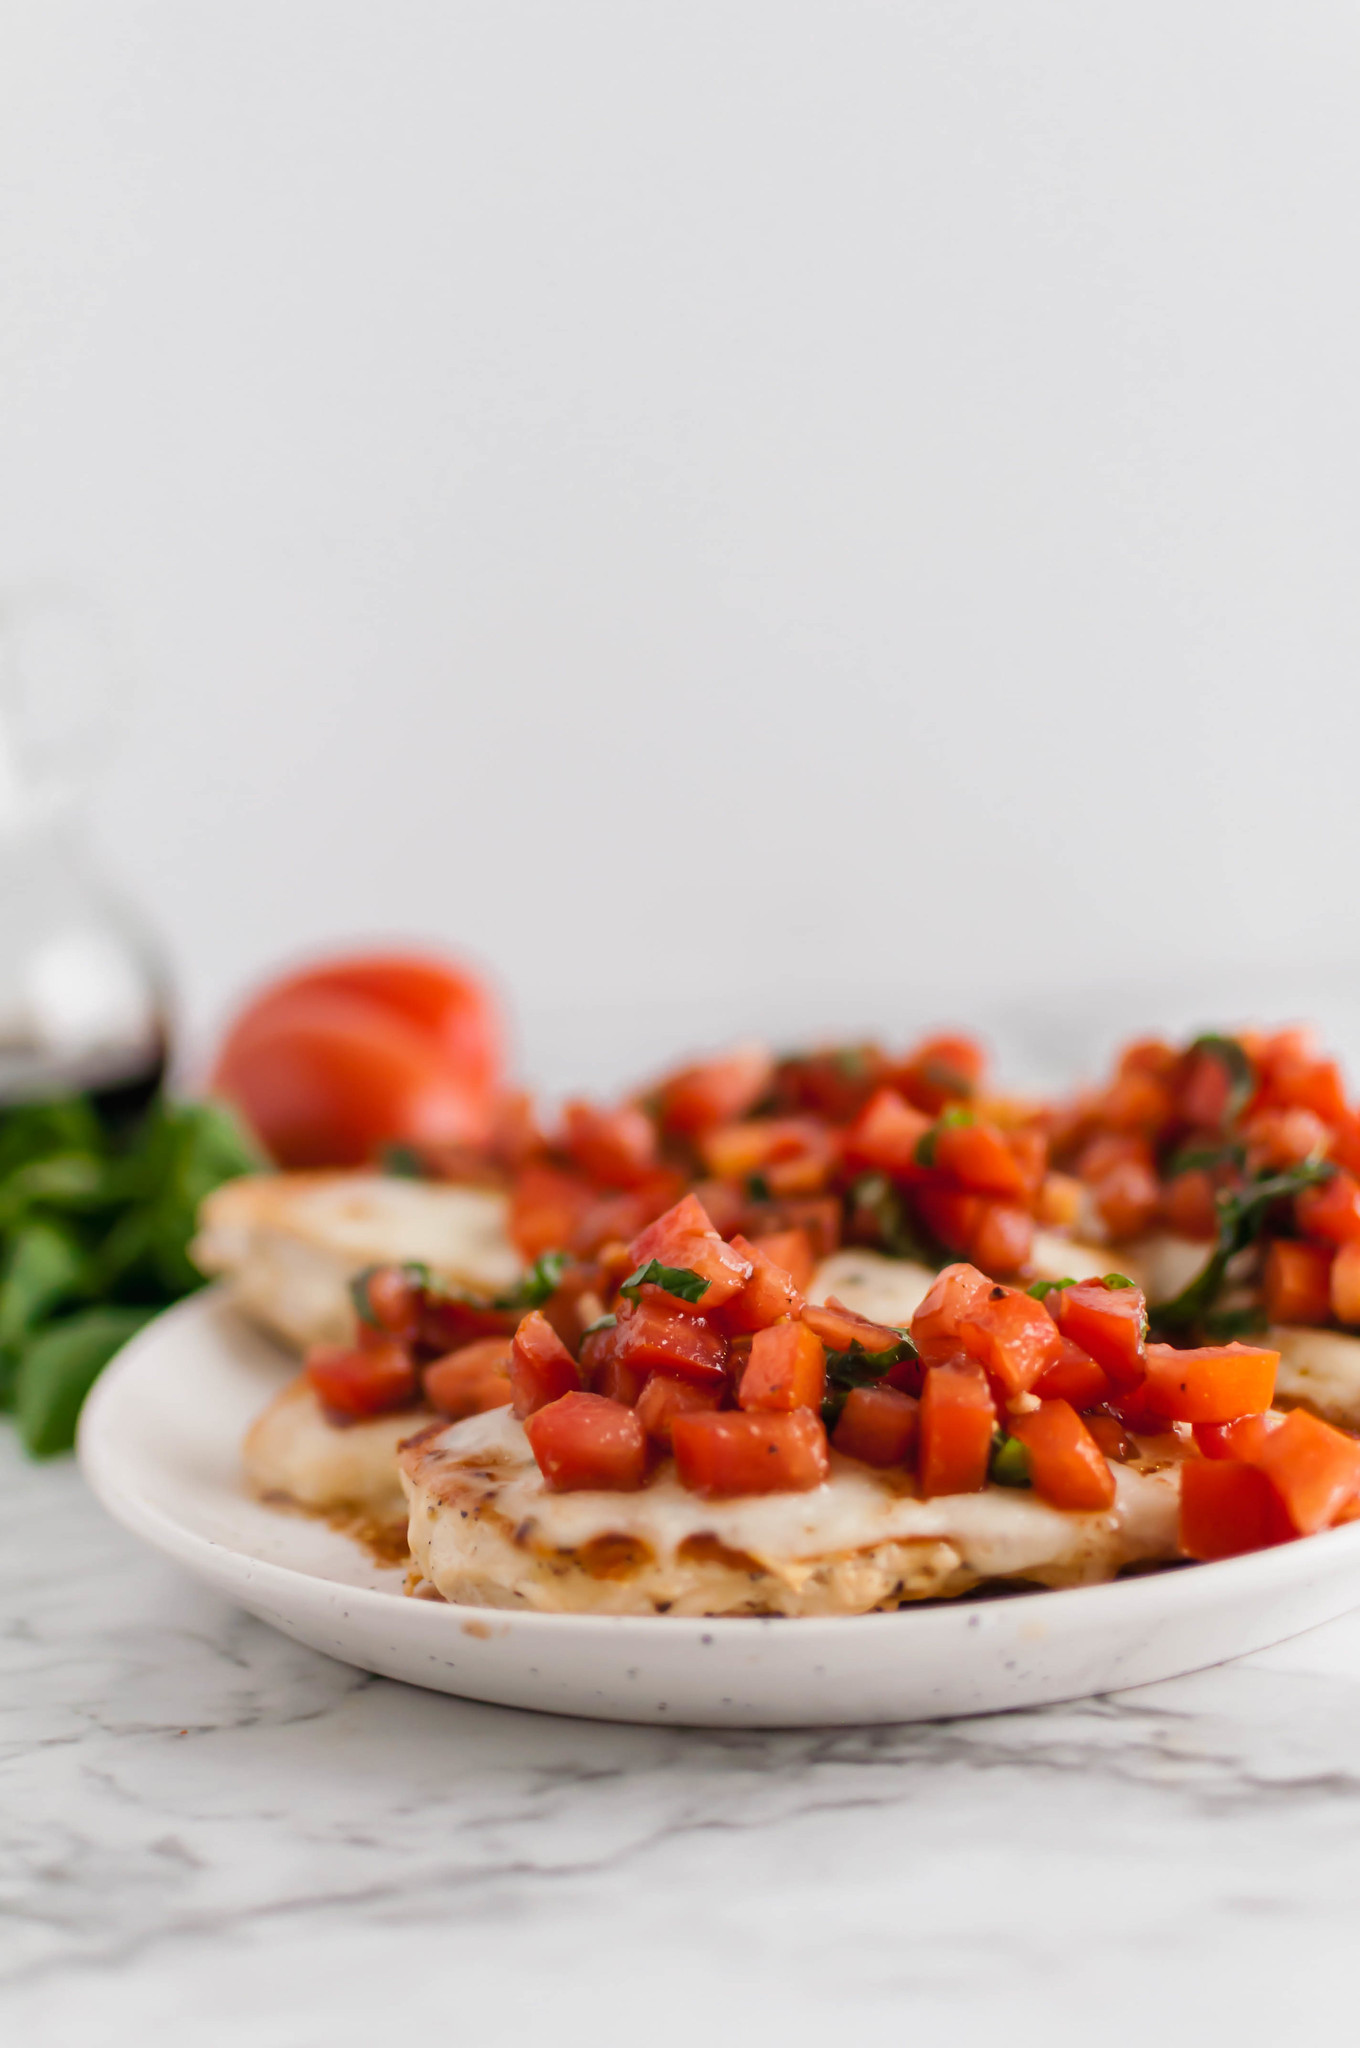 This Bruschetta Chicken comes together in less than 30 minutes for the perfect simple, healthy and fresh dinner. Perfectly seared chicken, lots of melted mozzarella and a super simple homemade bruschetta.